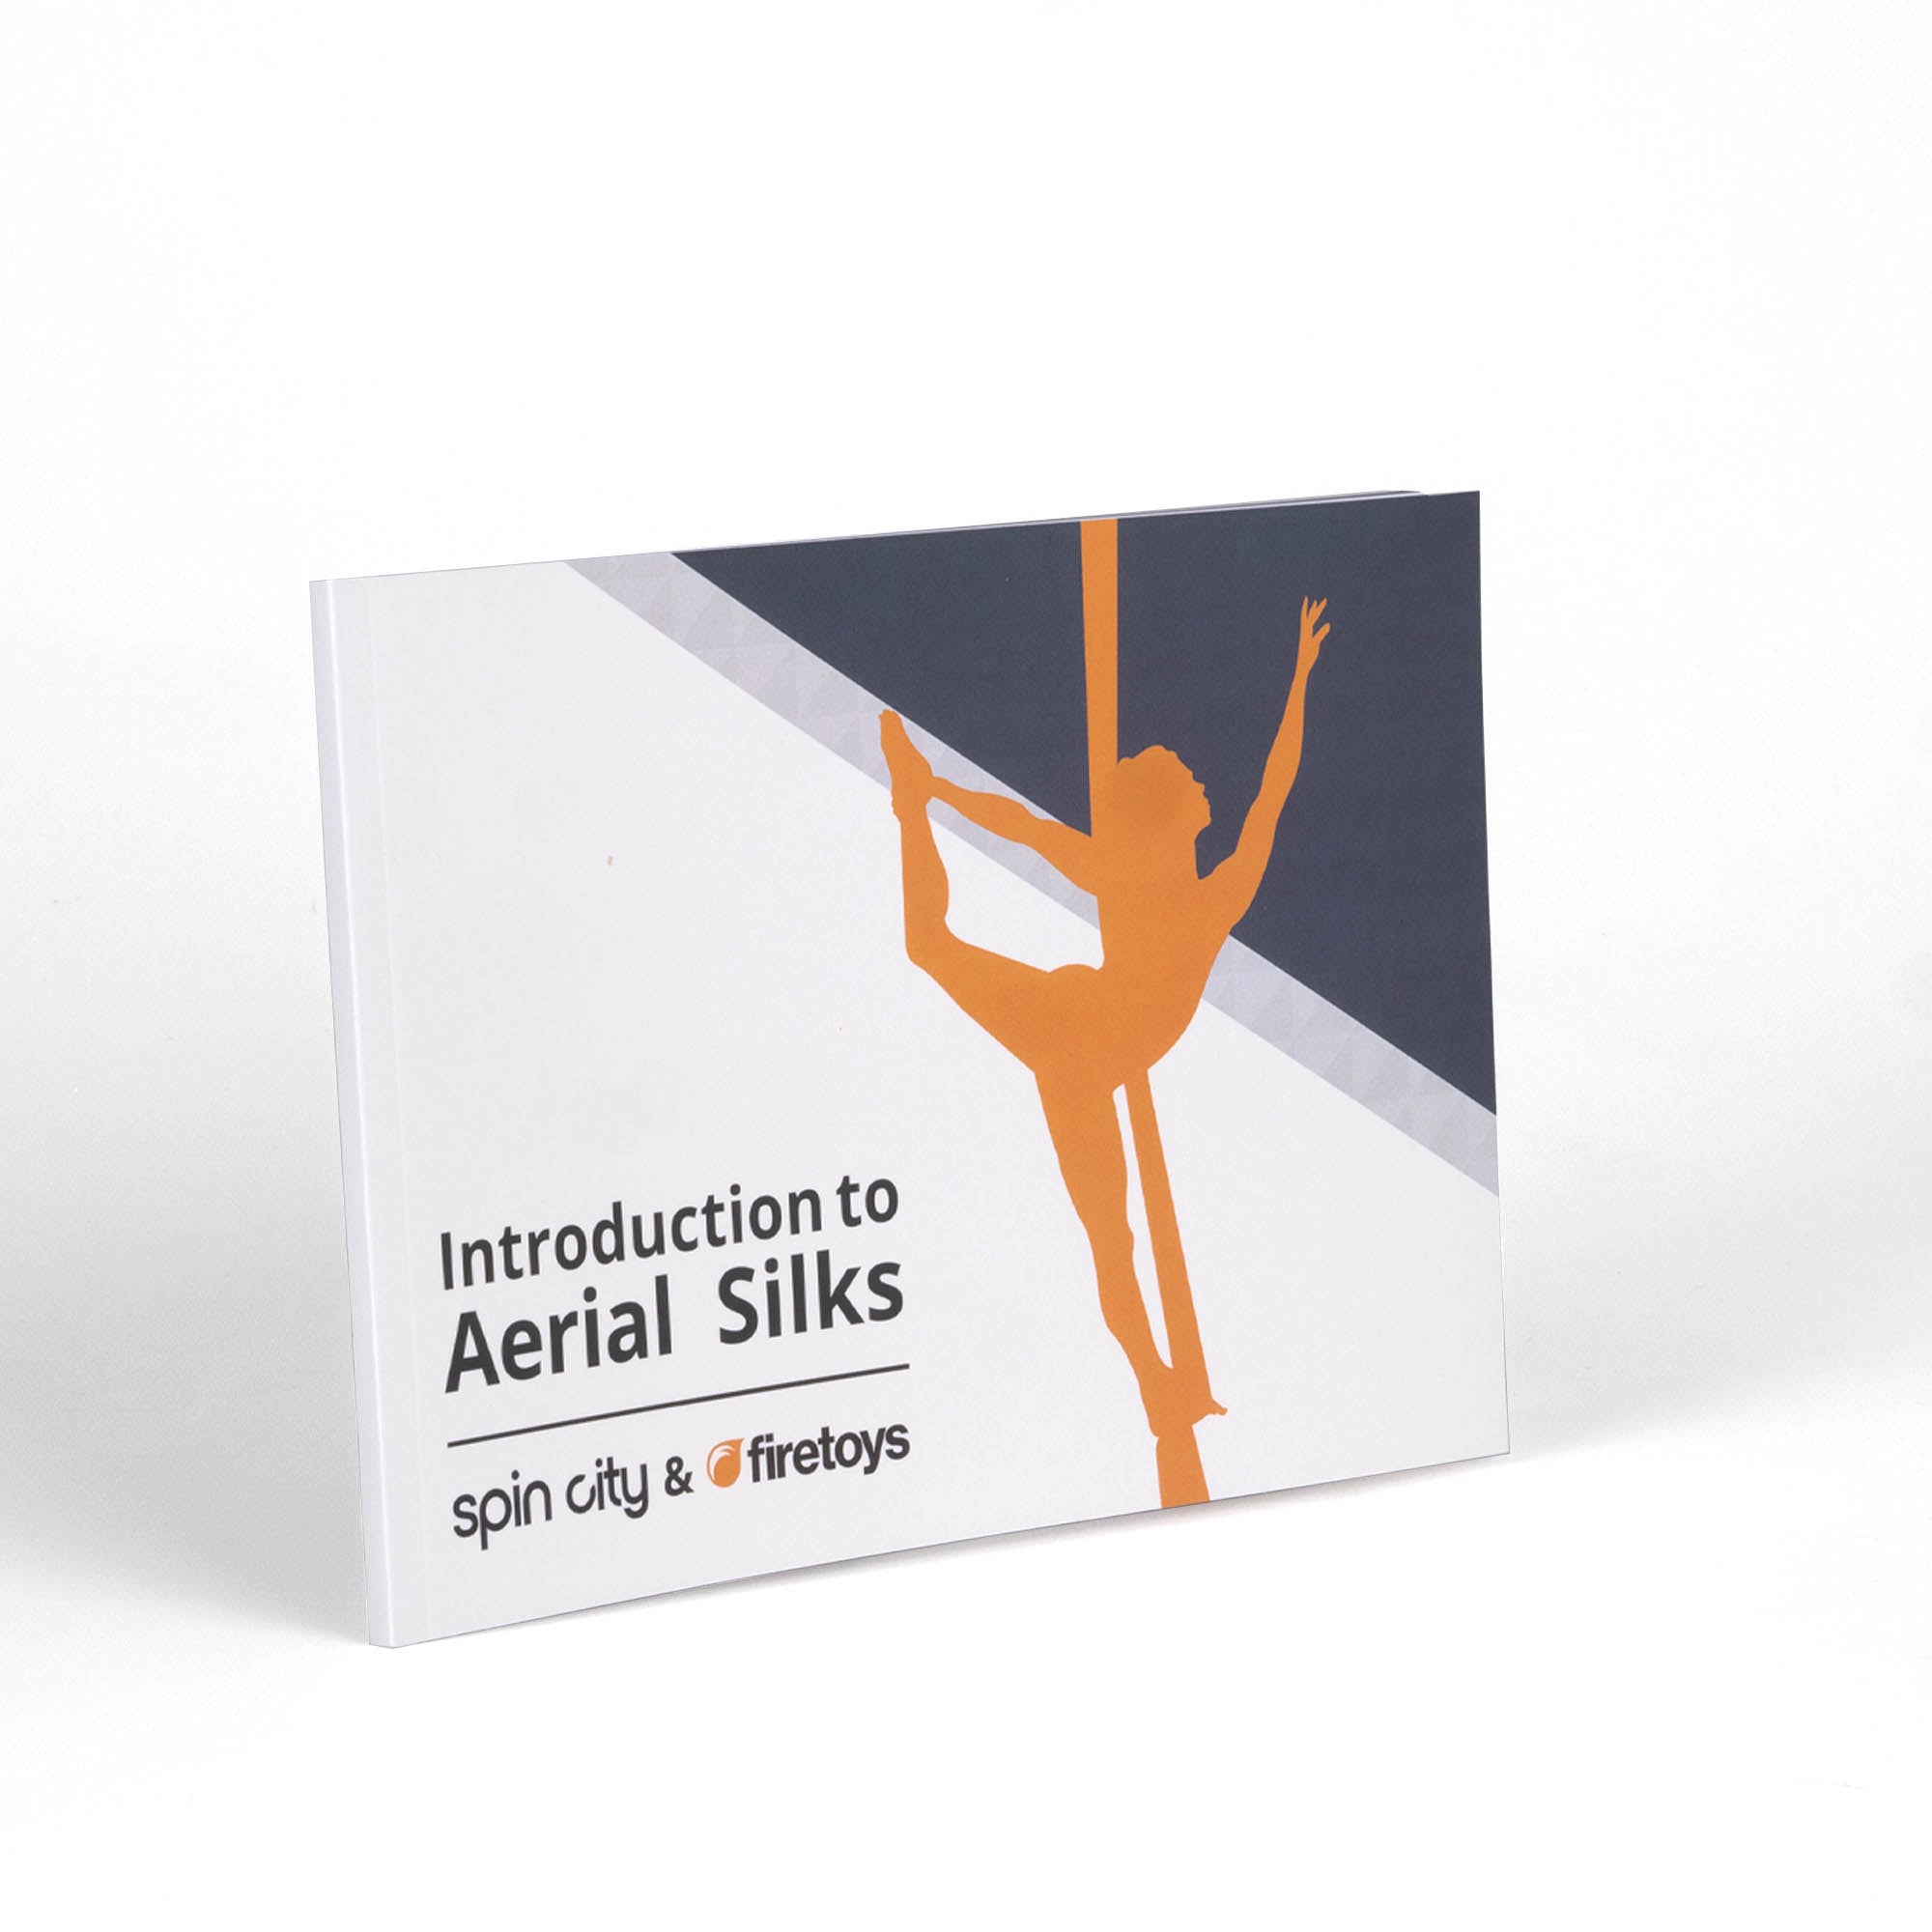 Aerial silks book cover showing the spine